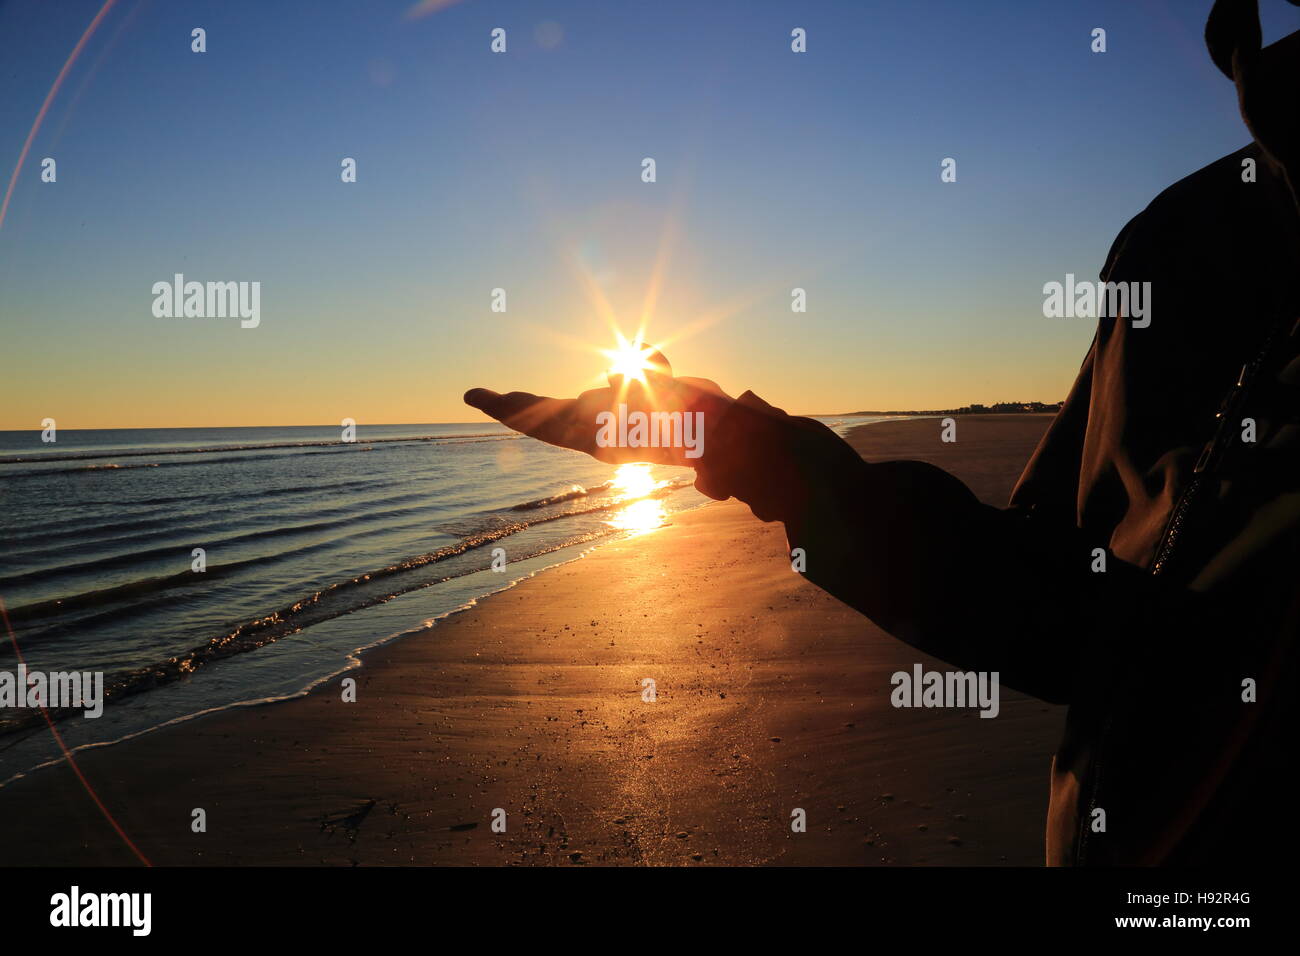 The silhouette of a man holds a seashell on the beach during sunset. A starburst or sunburst radiates from his hand. Stock Photo